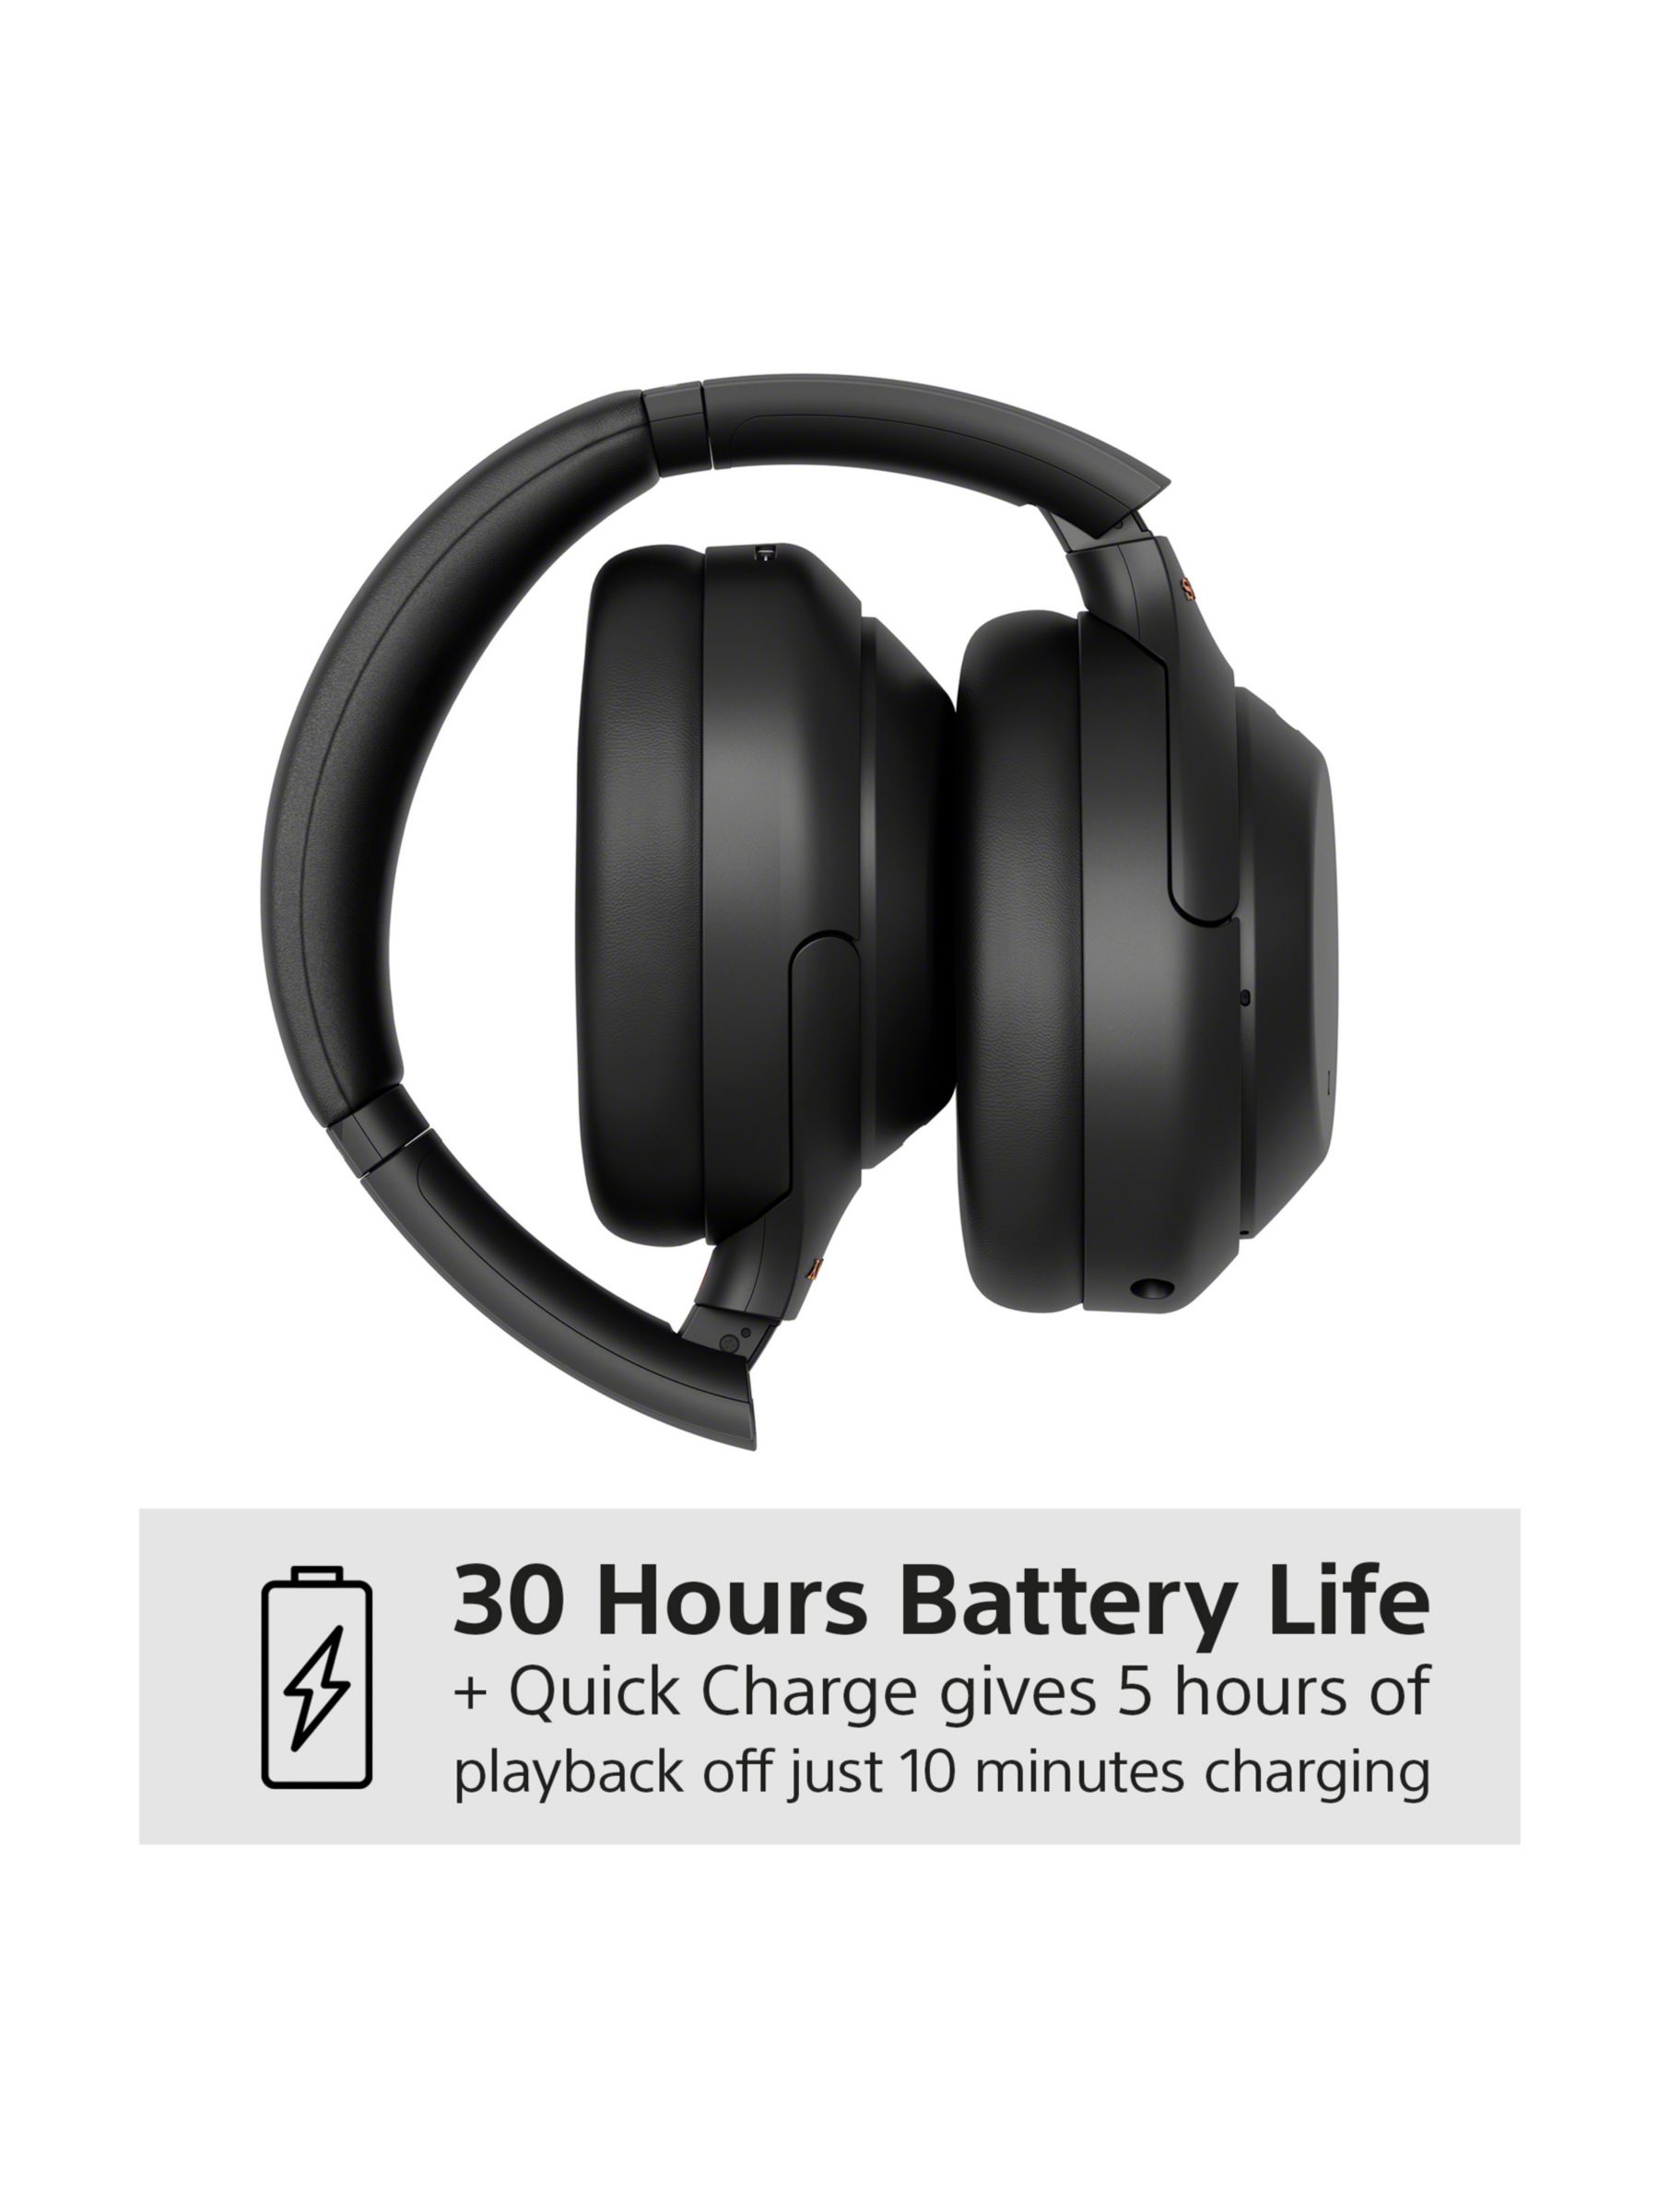  Sony WH-1000XM4 Wireless Premium Noise Canceling Overhead  Headphones - 30hr Battery Life, Over Ear Style with Mic for Phone-Call and  Alexa Voice Control for Google Assistant - Black : Electronics